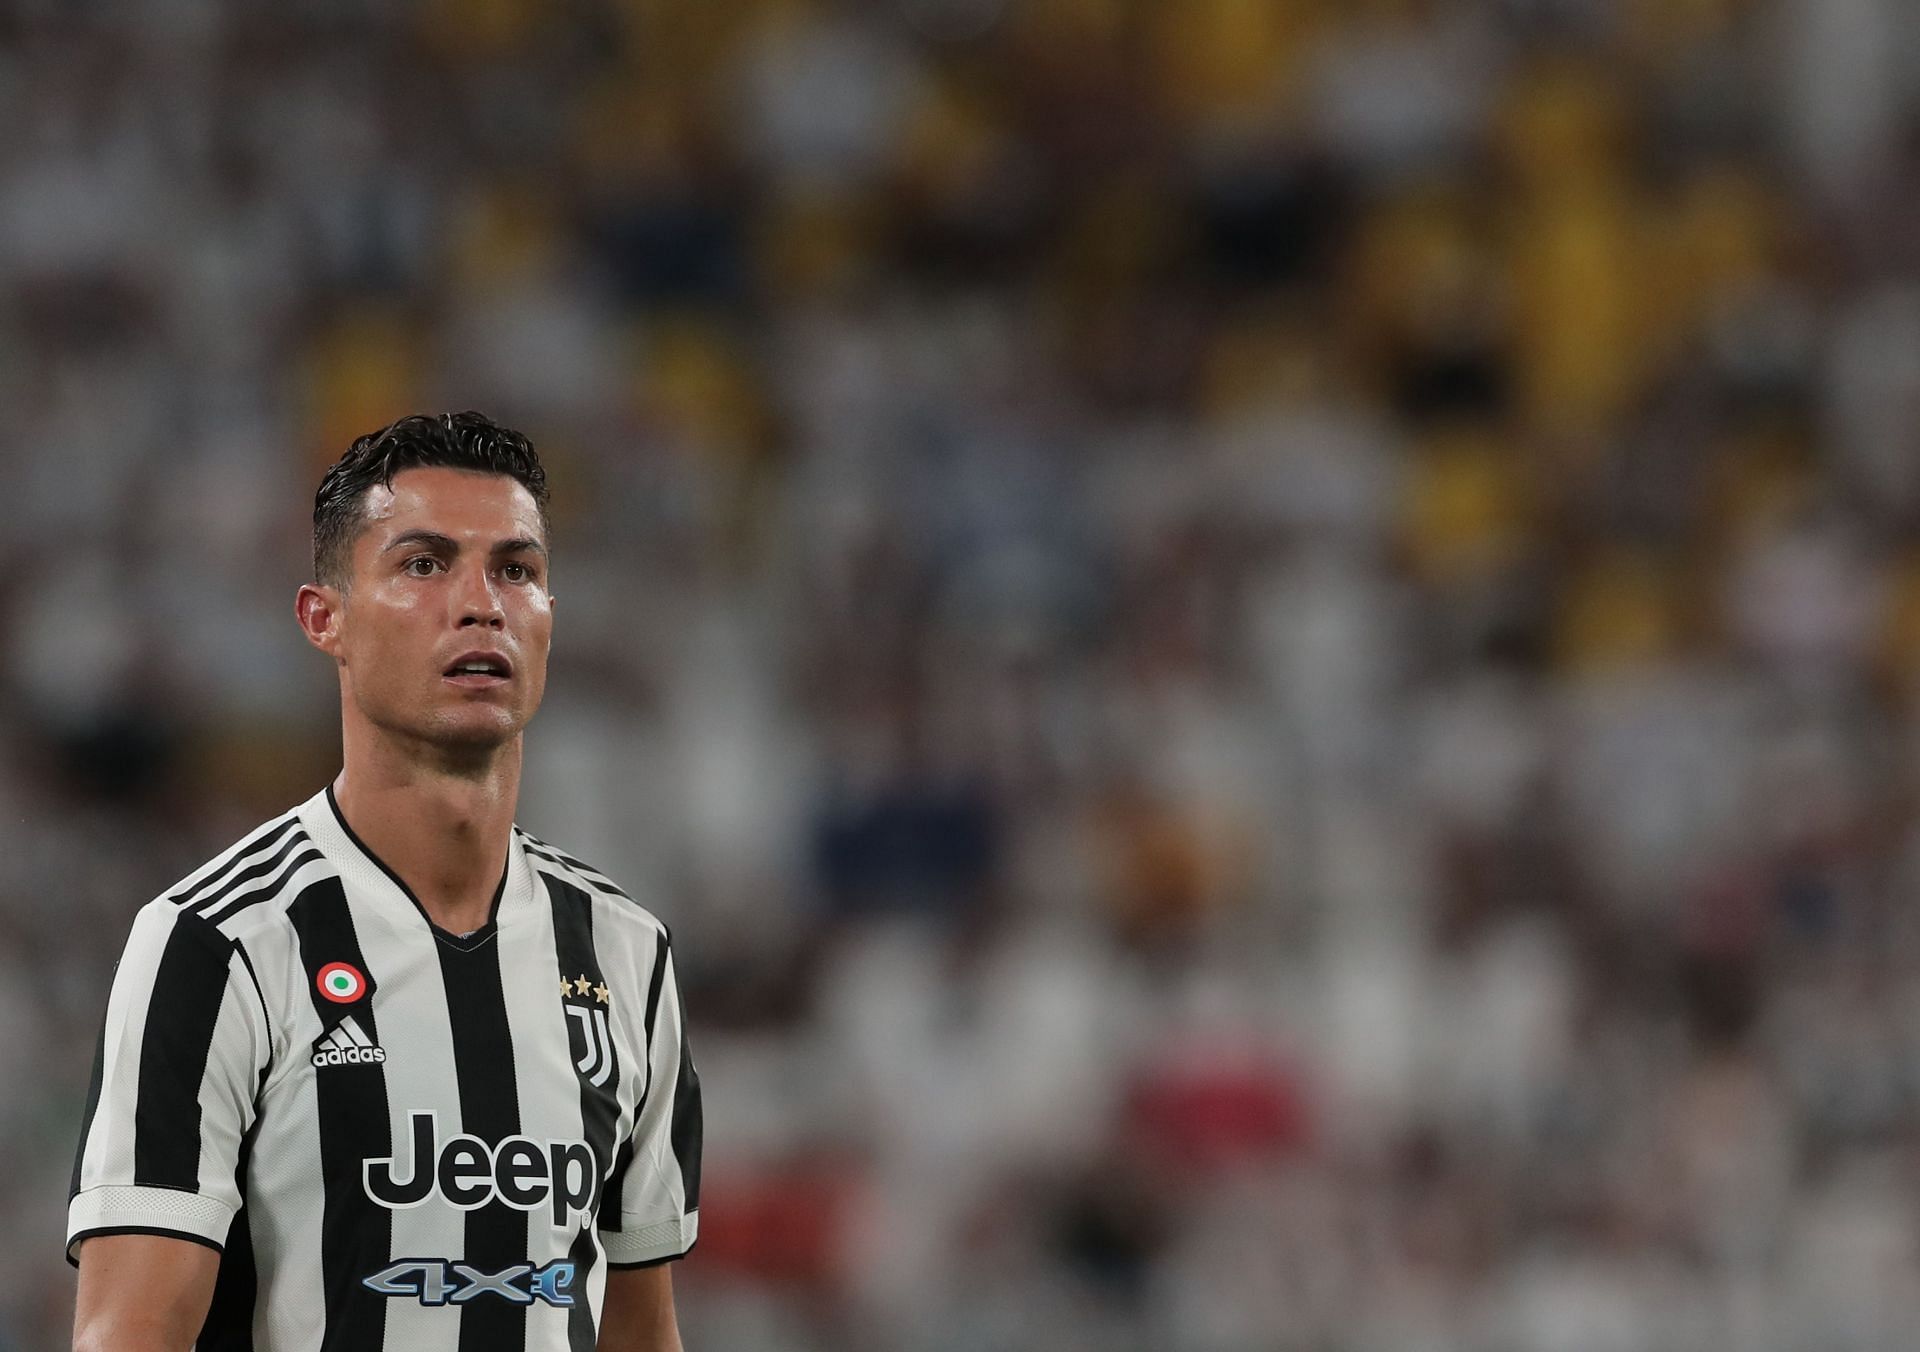 Cristiano Ronaldo departed Juventus this summer with the club in a poor position.